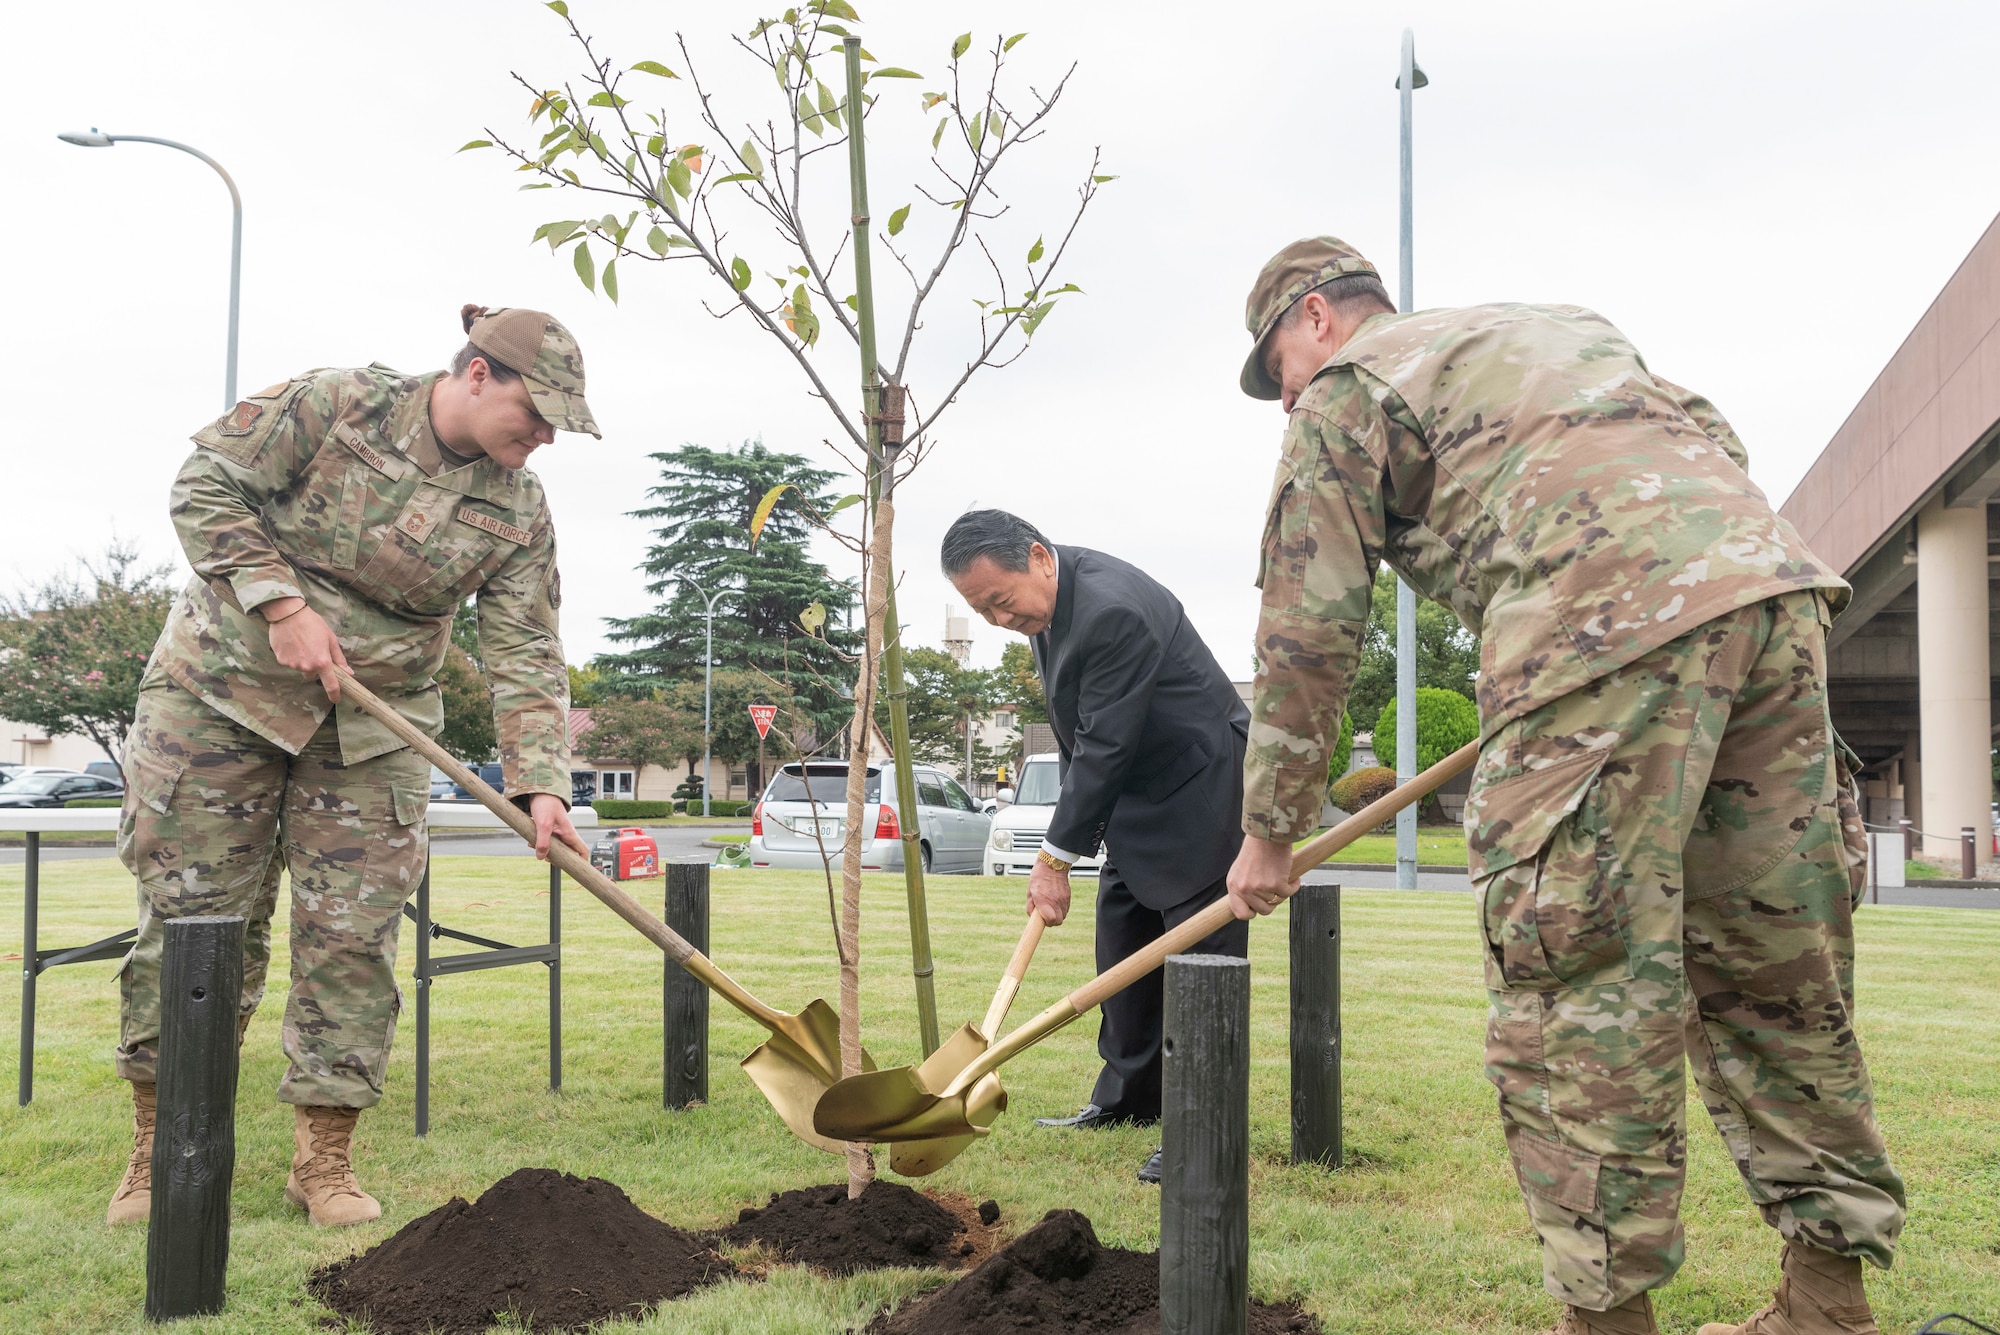 Chief Master Sgt. Jessica Cambron, 374th Mission Support Group senior enlisted leader, left, Fumioki Hirahata, Akishima-Yokota Friendship Club president, center, and Col. Ryan Vetter, 374th Mission Support Group commander, work together to plant a cherry sapling during a ceremony at Yokota Air Base, Japan, Oct. 5, 2022.